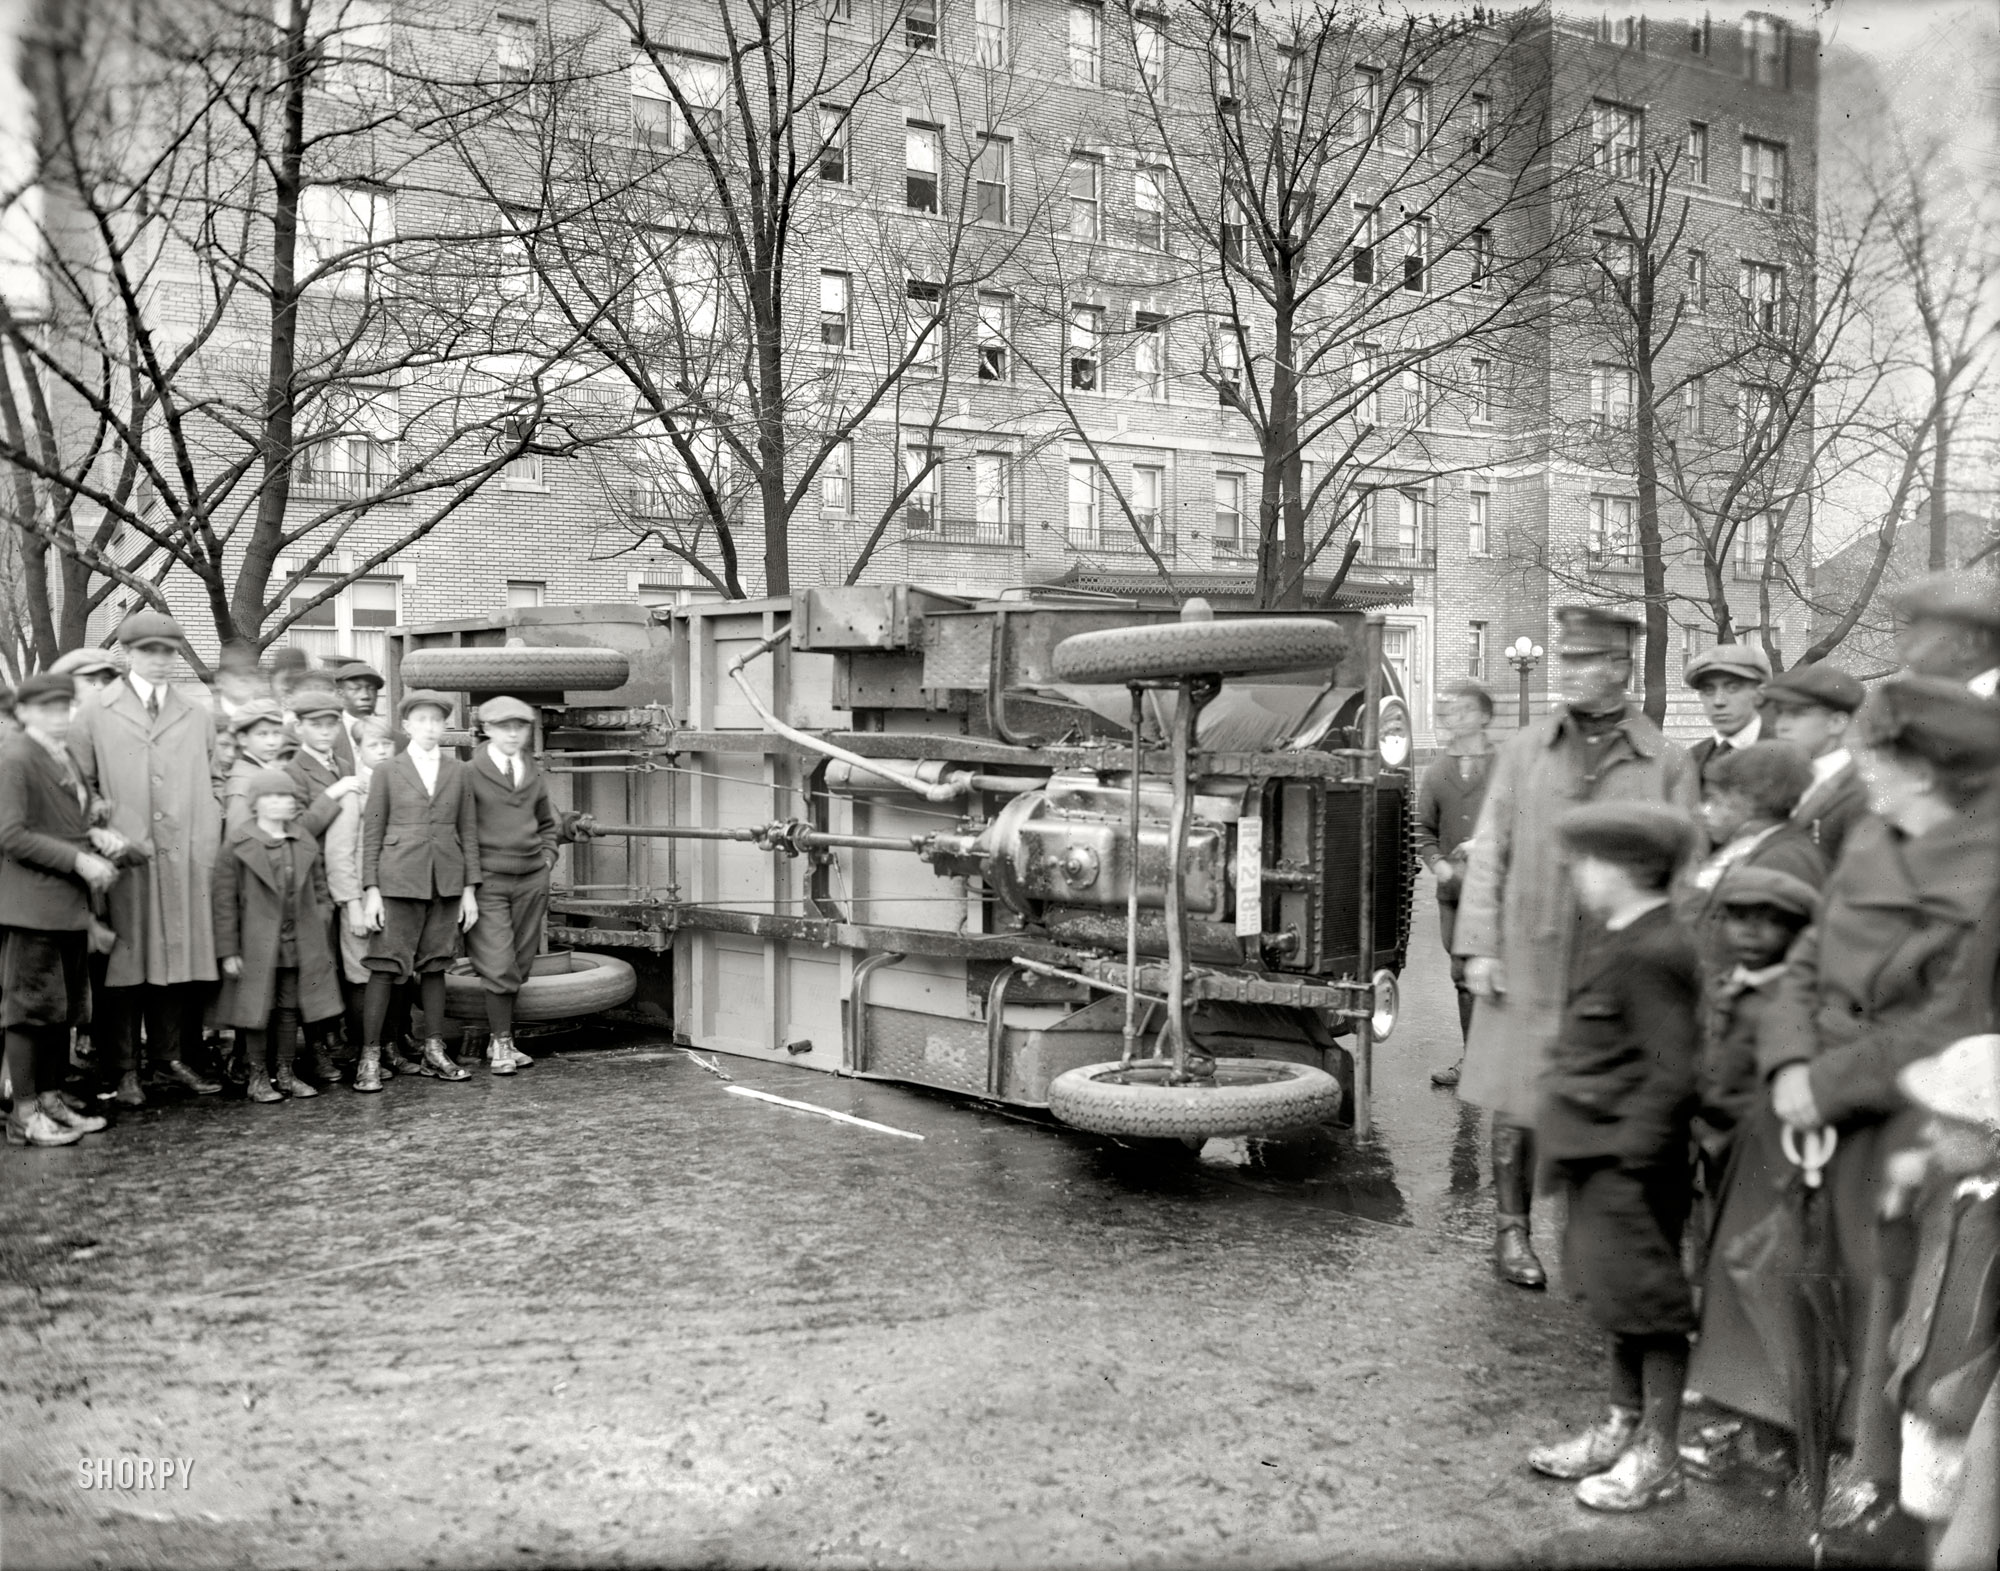 1921. "Washington Rapid Transit Co. wreck." More vehicular mayhem in the nation's capital. National Photo Company glass negative. View full size.